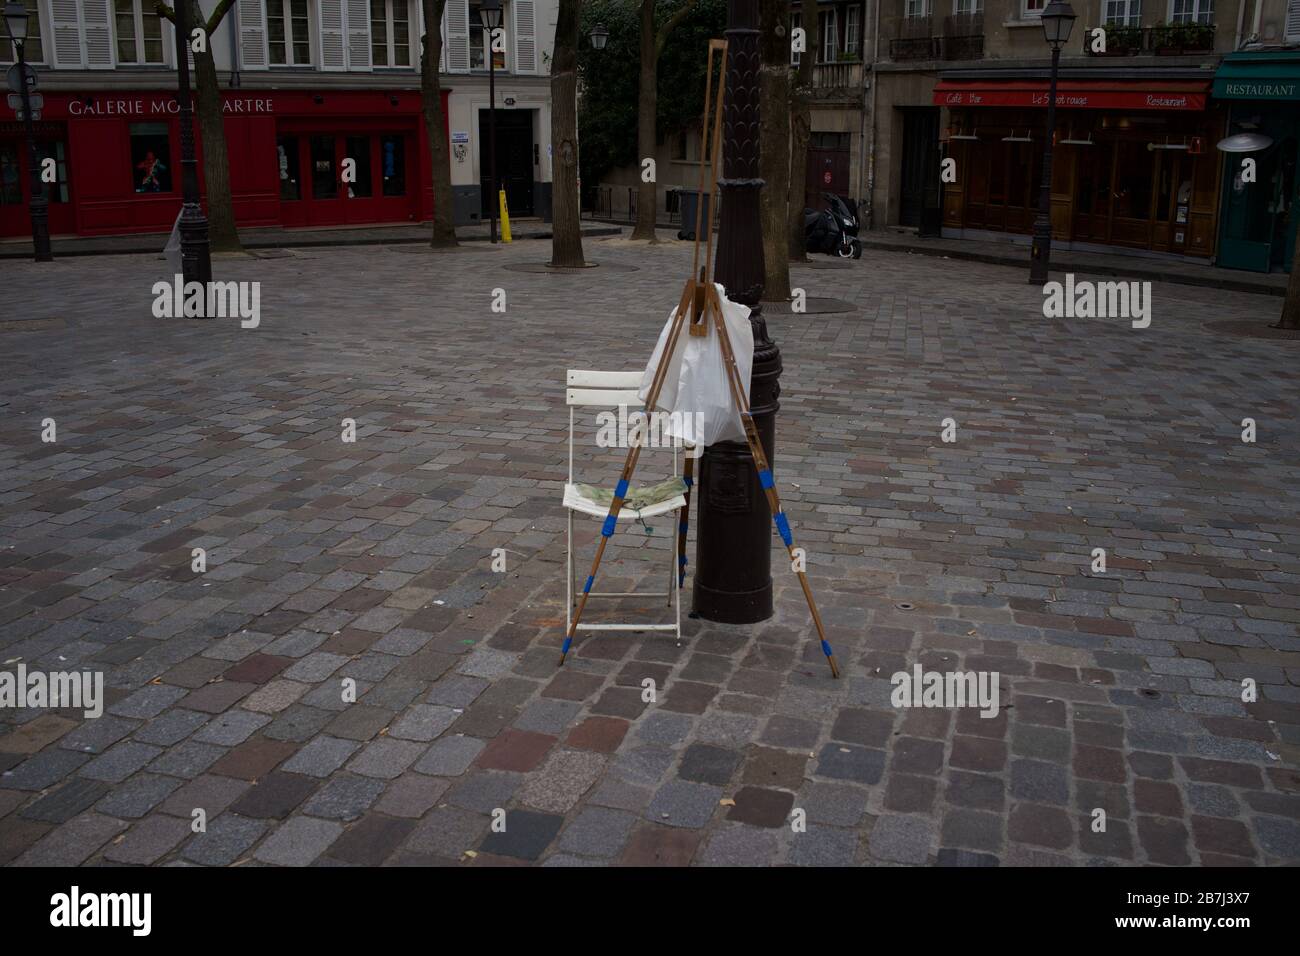 Artists easel and chair, closed cafés, a deserted Place du Tertre, 75018 Paris, France - lockdown Stock Photo